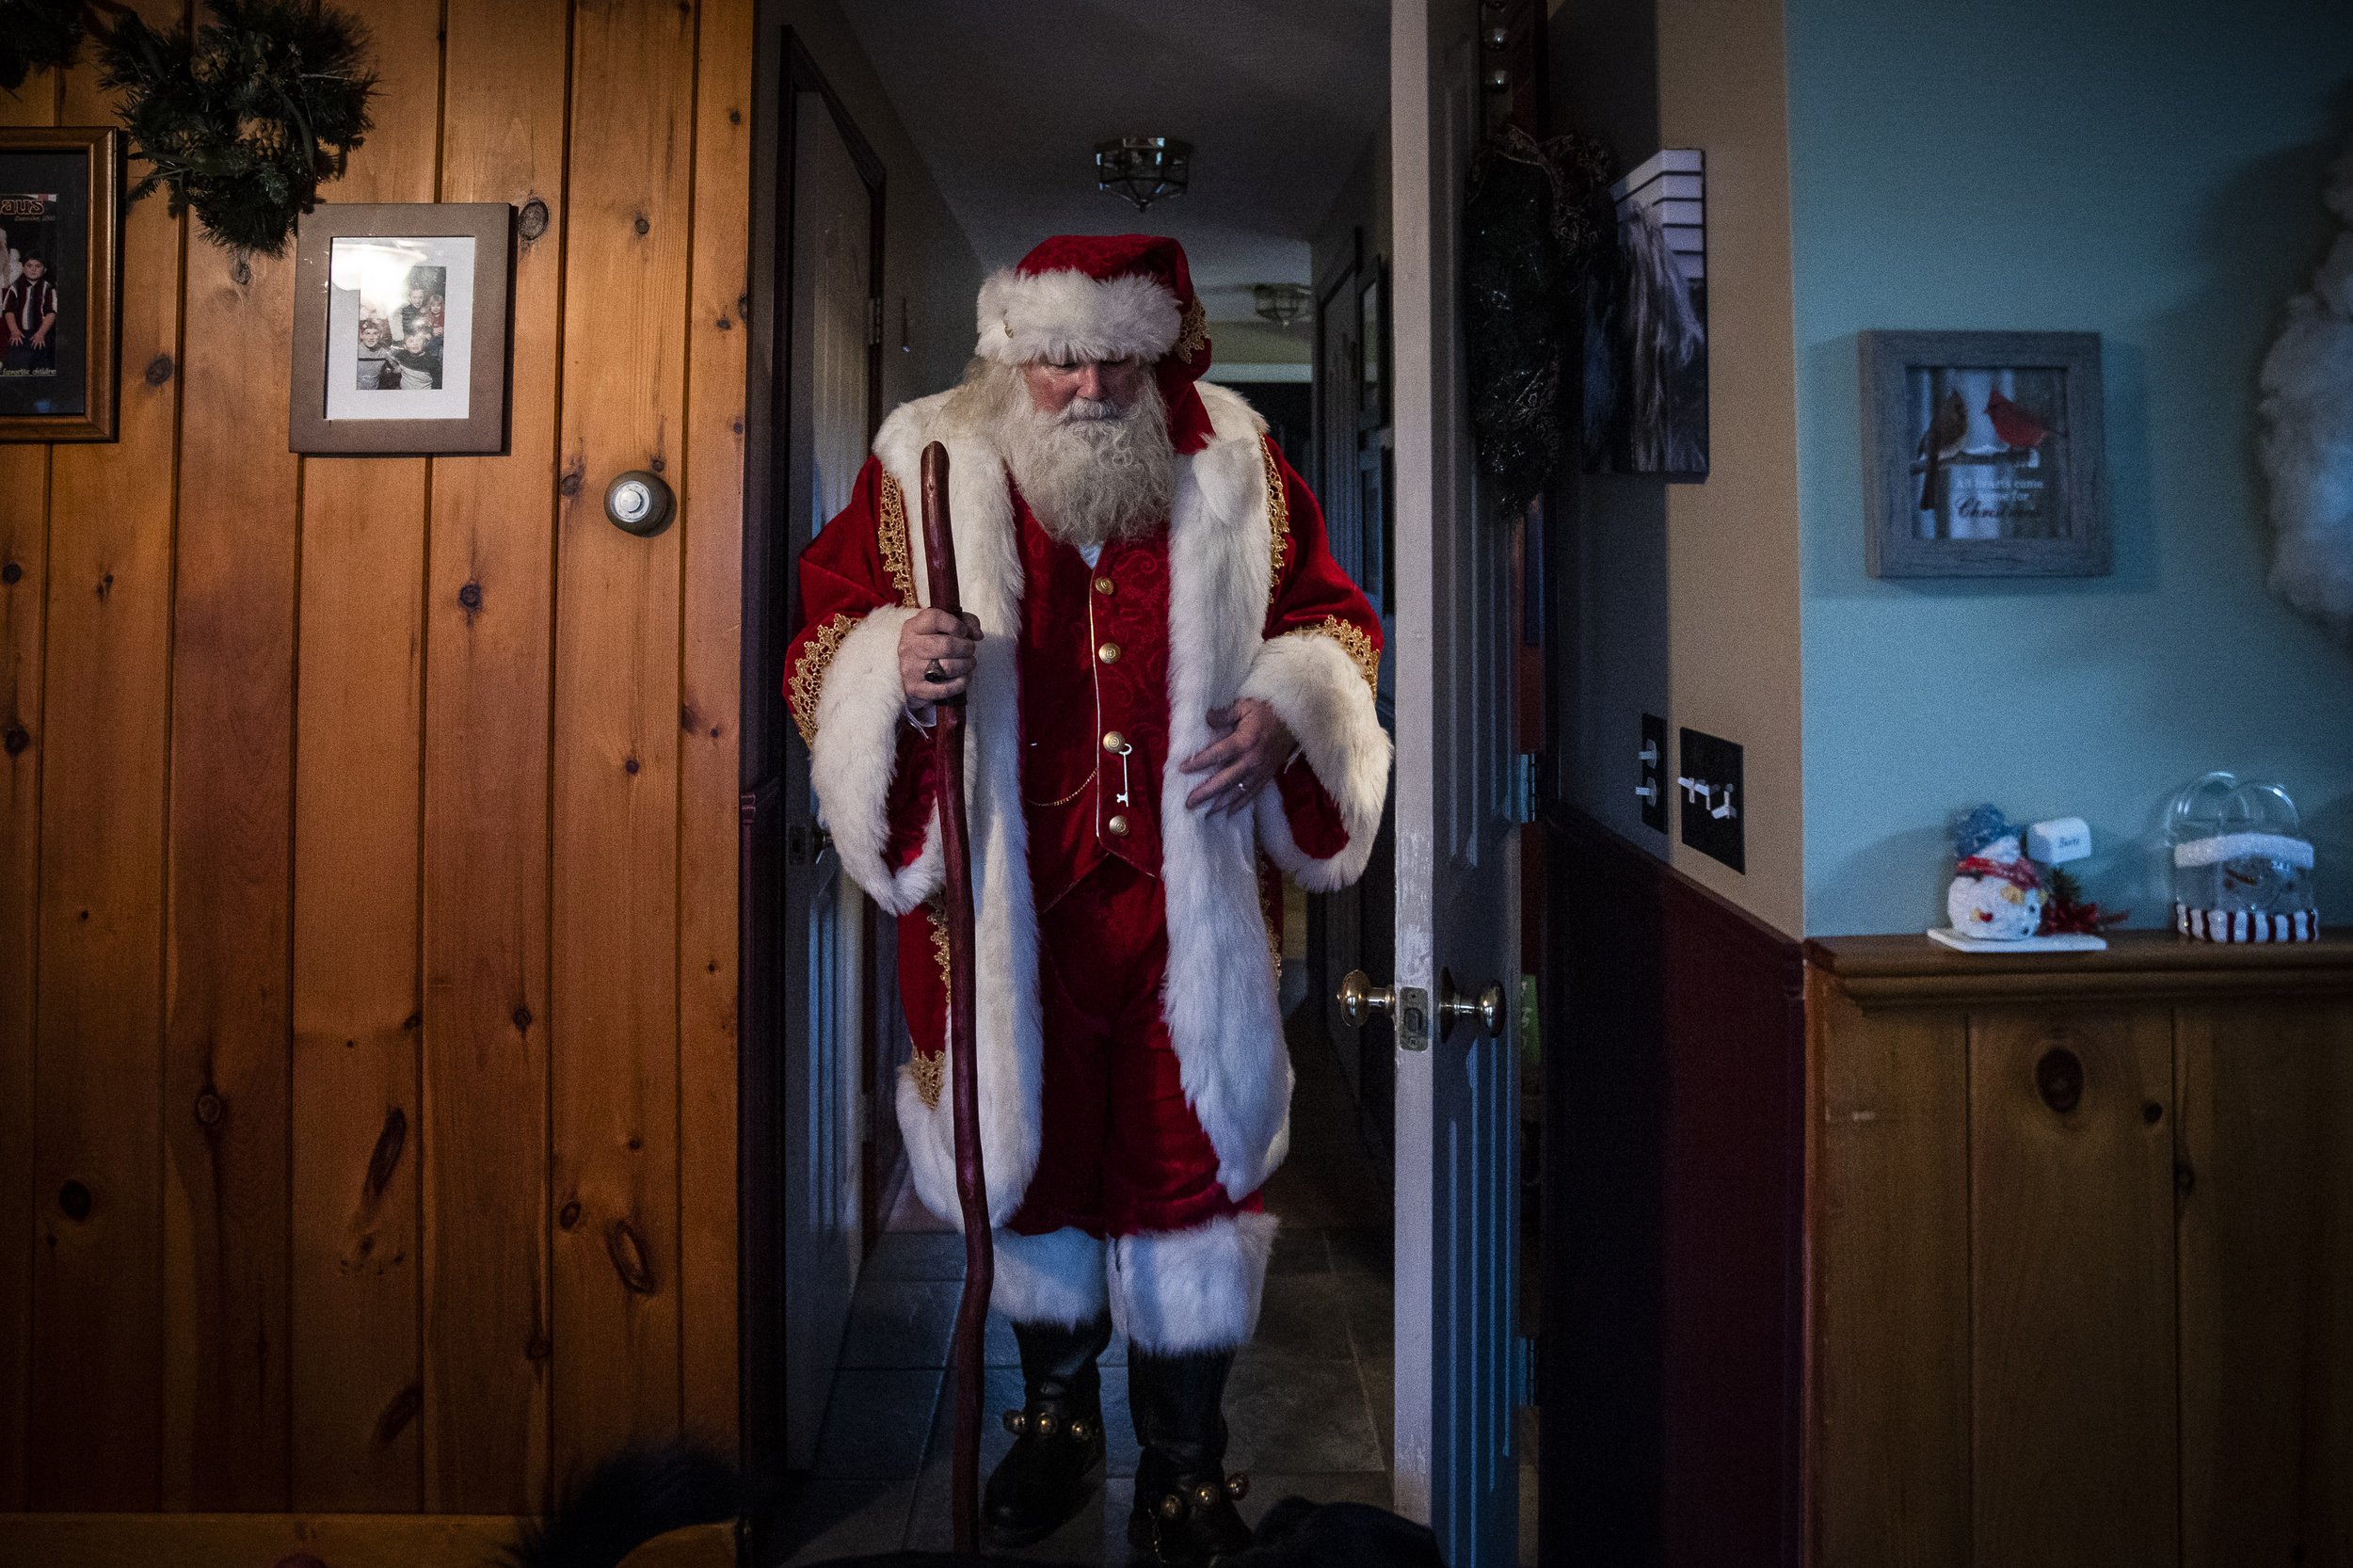  Rick Banks finishes getting dressed while at his Chichester, NH home on December 10, 2022. He’s chosen to wear his “Adele” Santa suit today. That’s the velvet one with gold brocade embellishments, reindeer buttons, and a silk-lined cape. It is the A